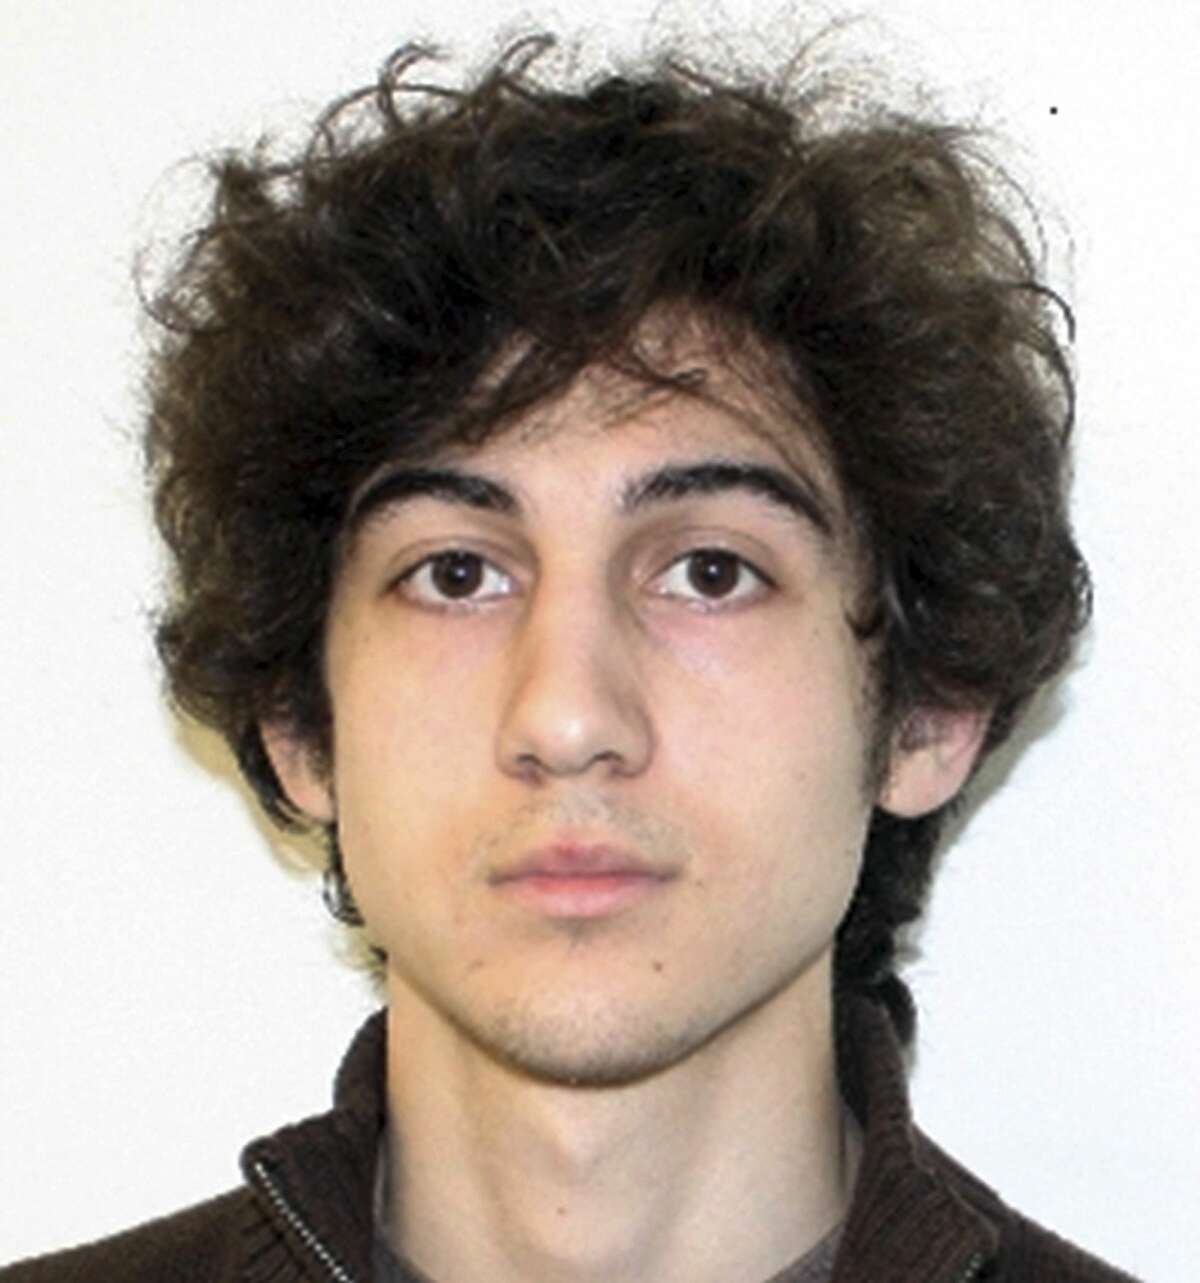 FILE - This undated file photo provided by the Federal Bureau of Investigation shows Dzhokhar Tsarnaev, charged in the Boston Marathon bombing.